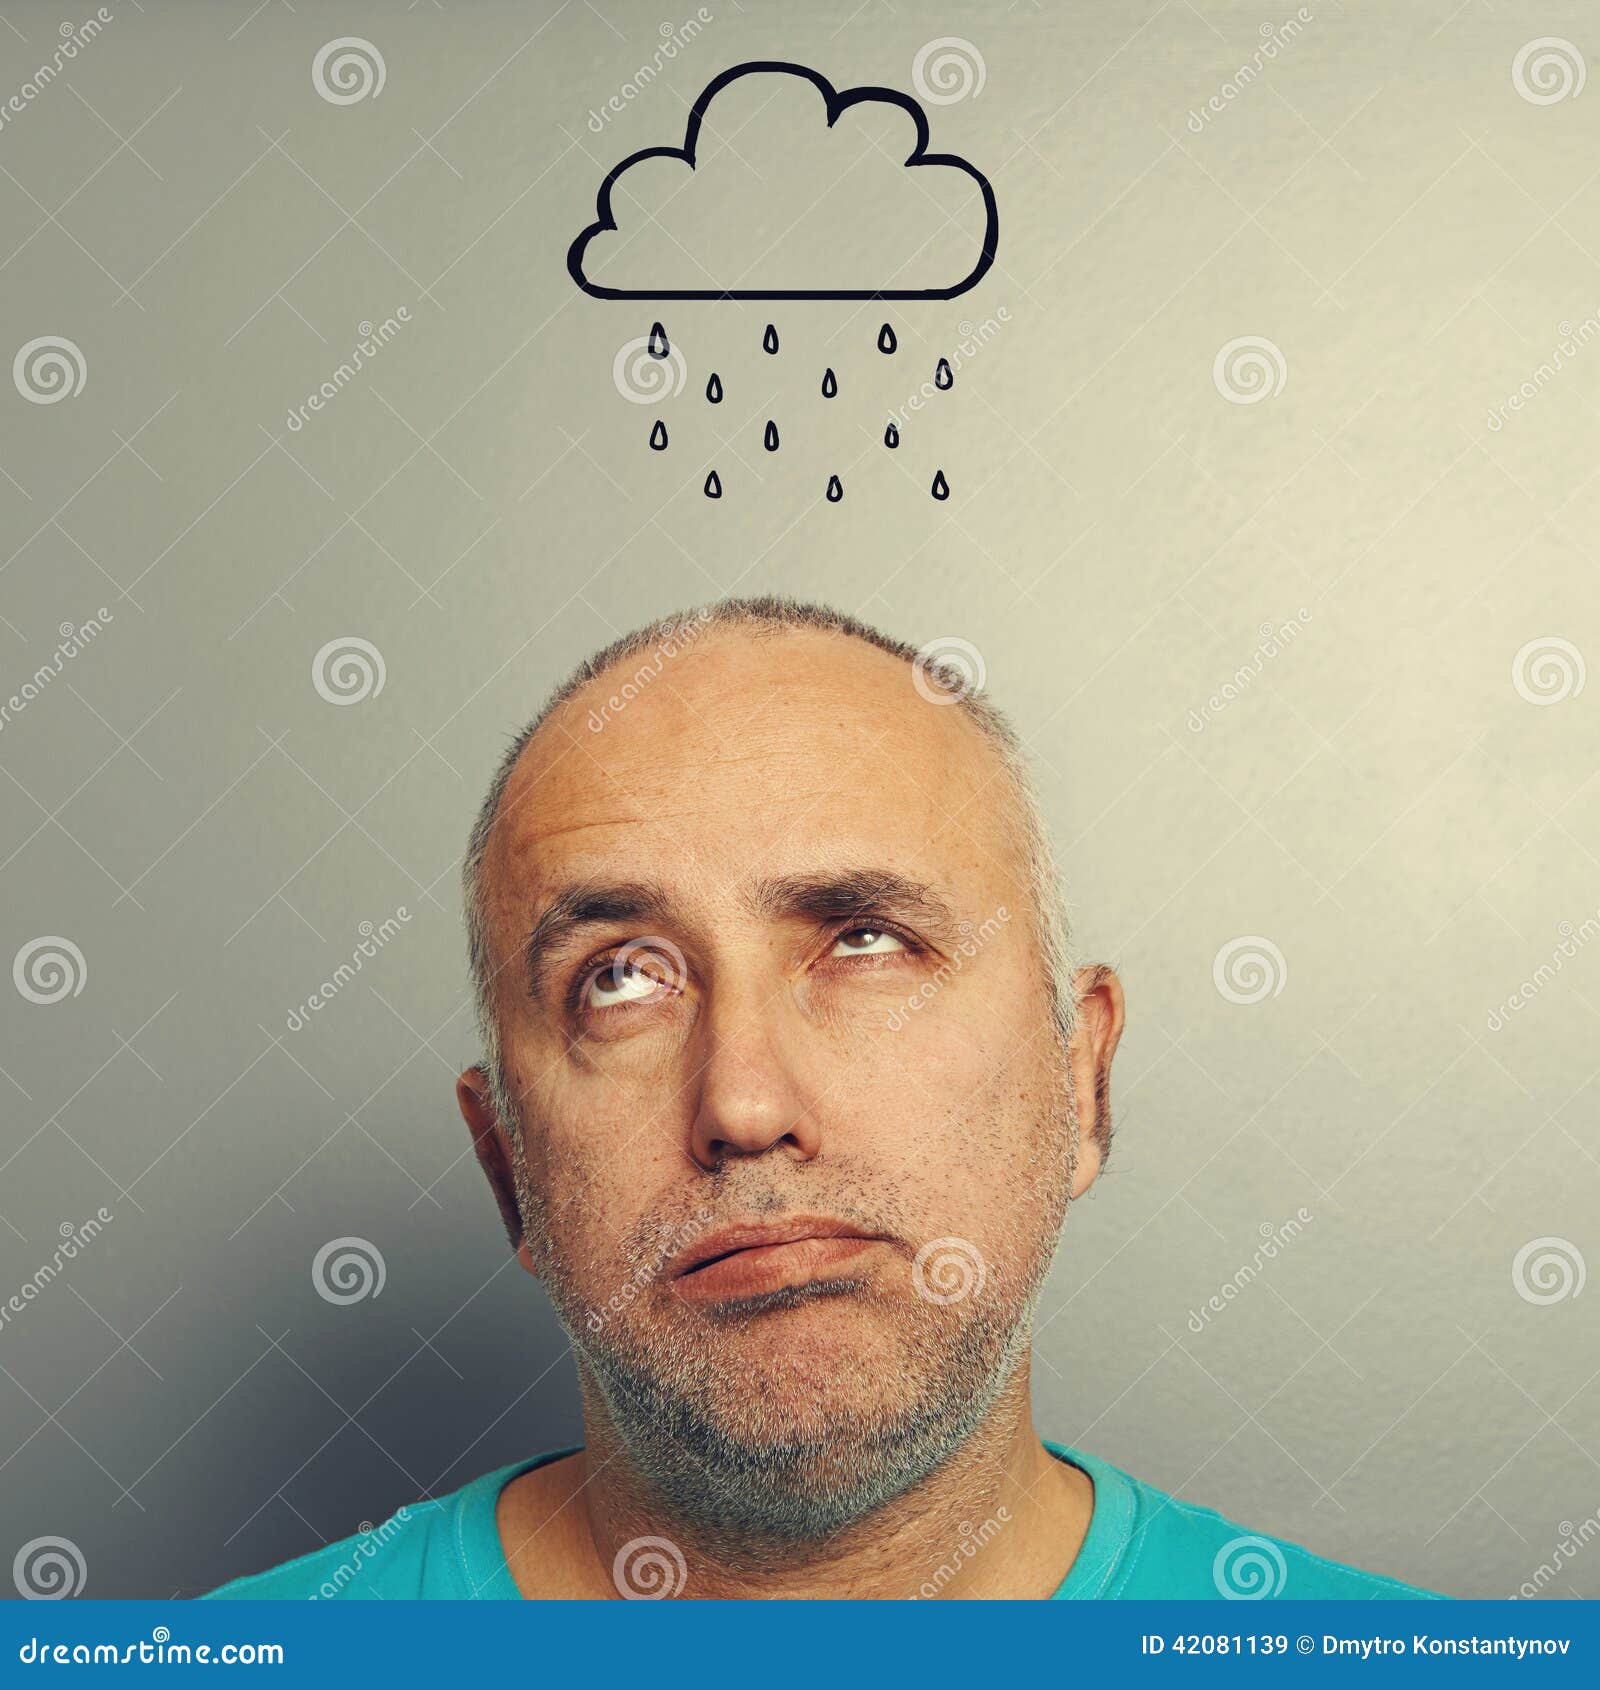 Man with drawing <b>storm cloud</b> - man-drawing-storm-cloud-portrait-stressed-senior-over-grey-background-42081139